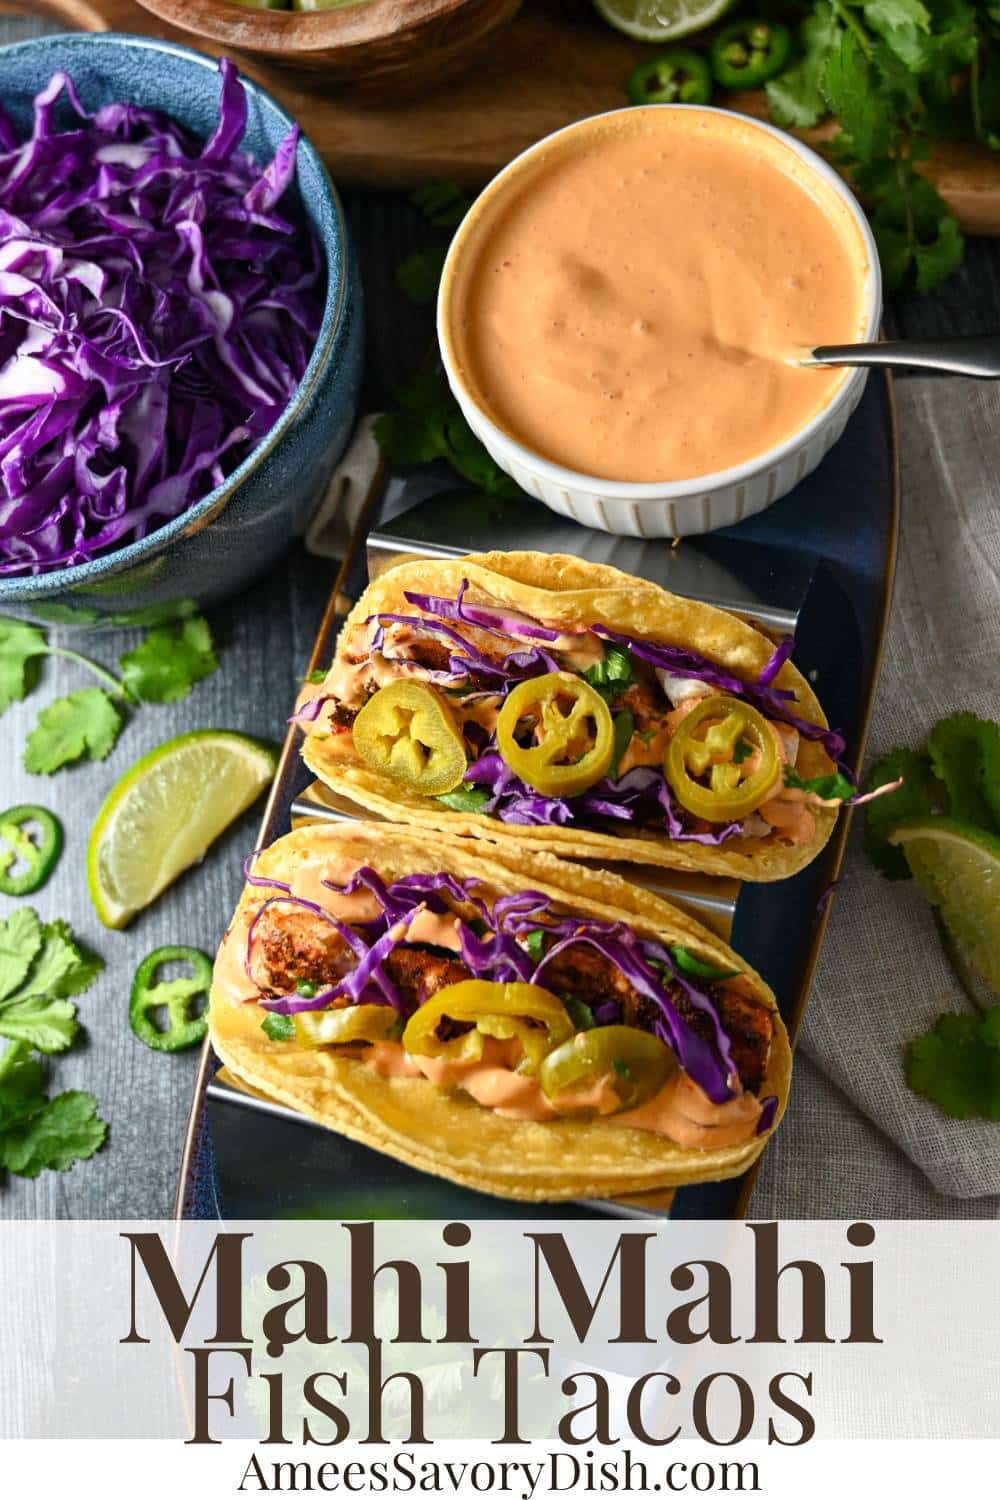 Finished with a chipotle lime crema drizzle, these fish tacos are quintessential for weeknight summer grilling! via @Ameessavorydish